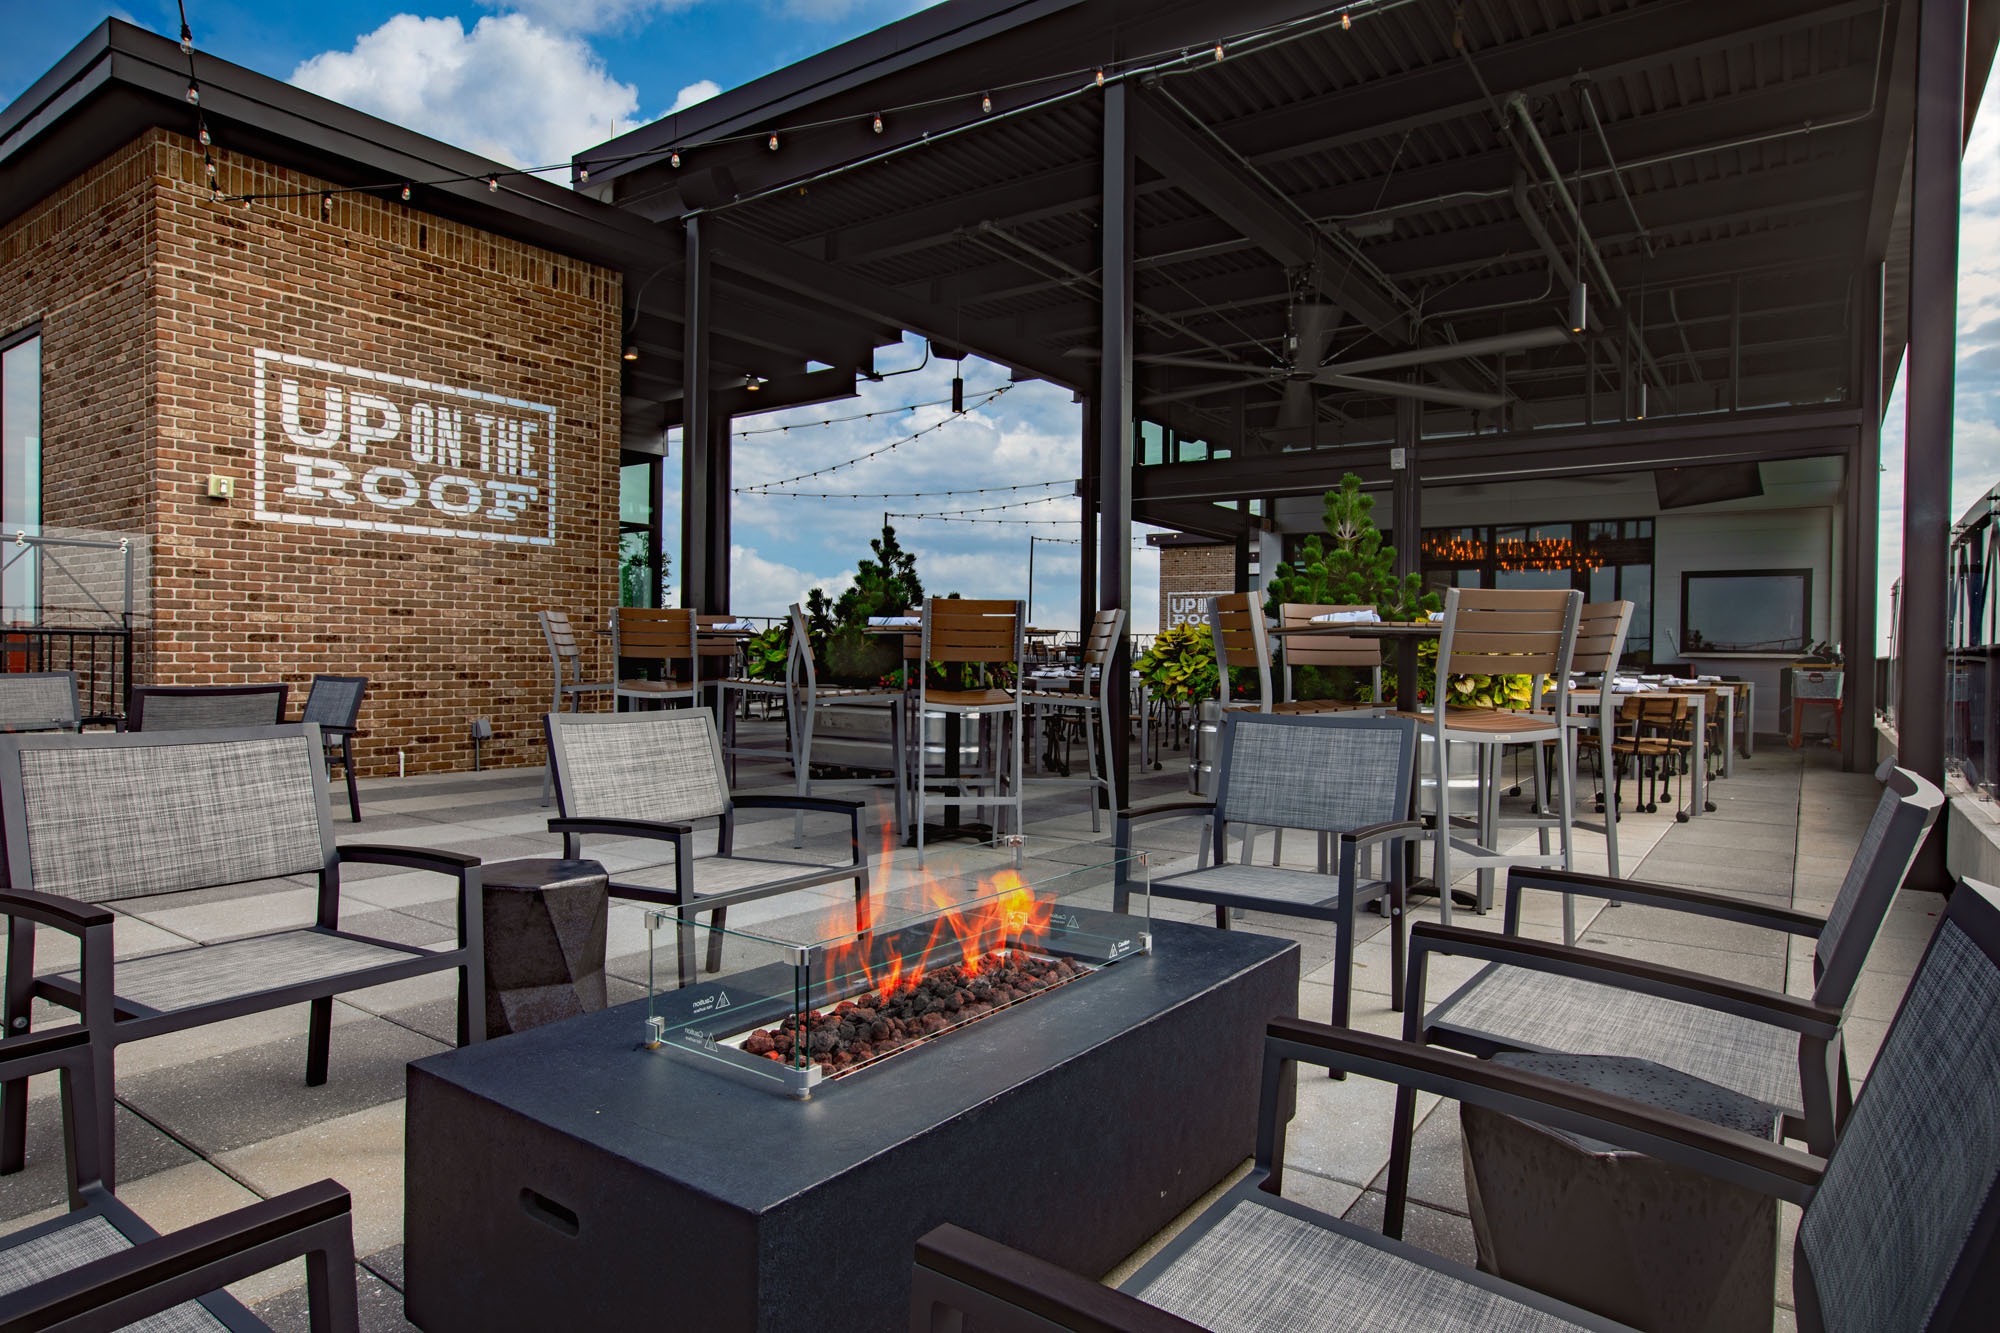 Anderson Outdoor Patio and Firepits at UP on the Roof